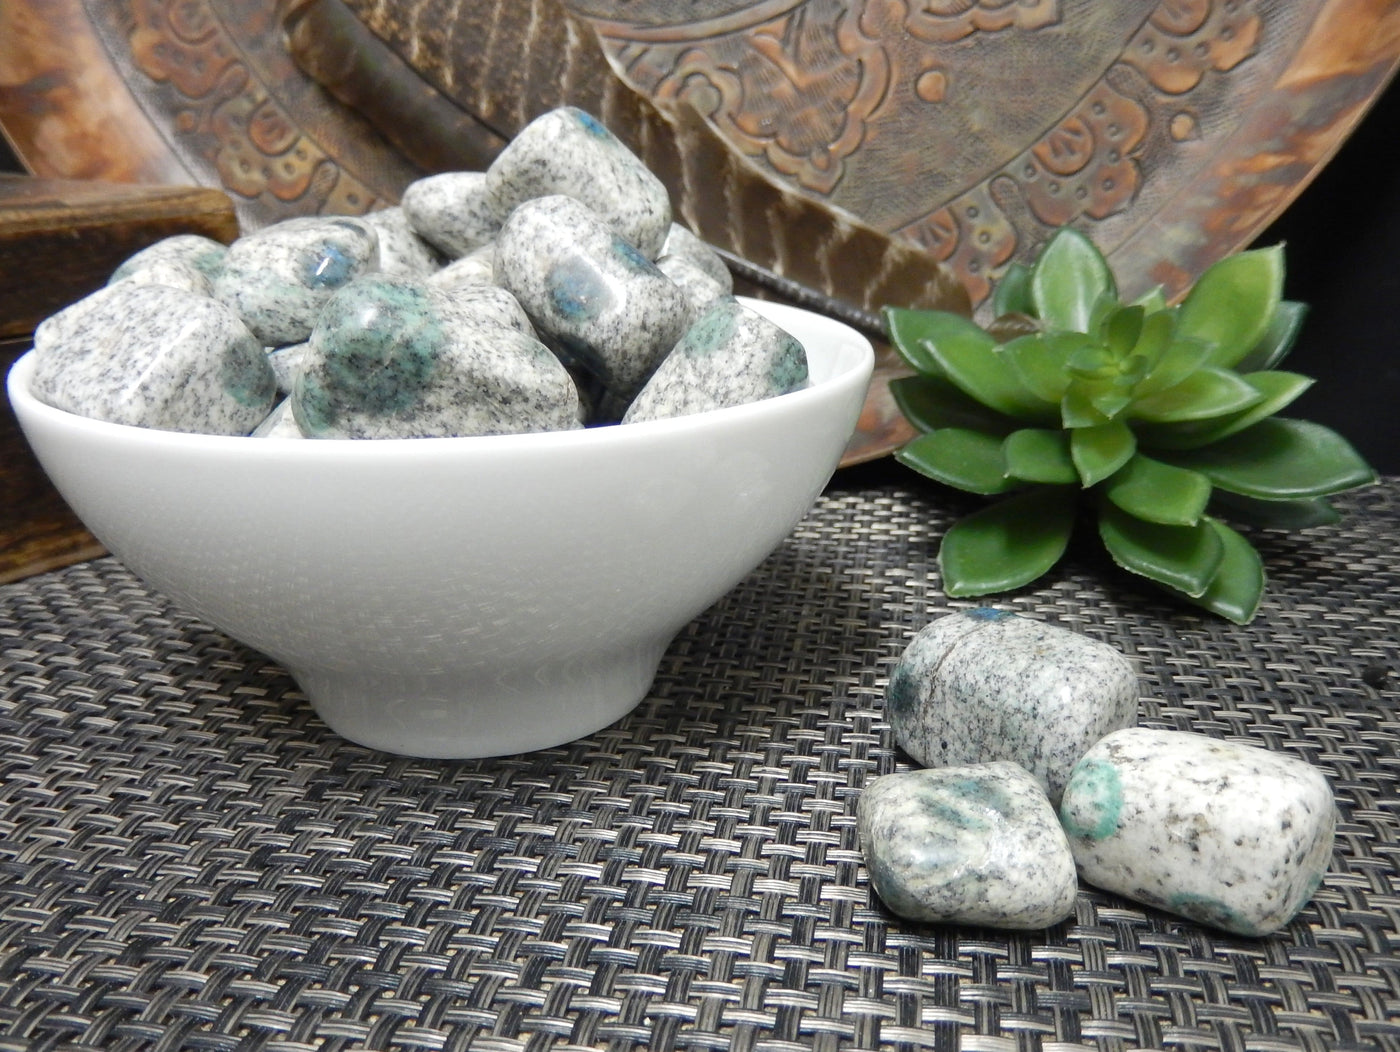 3 granite/jasper stones next to a bowl filled with them with decorations in the background